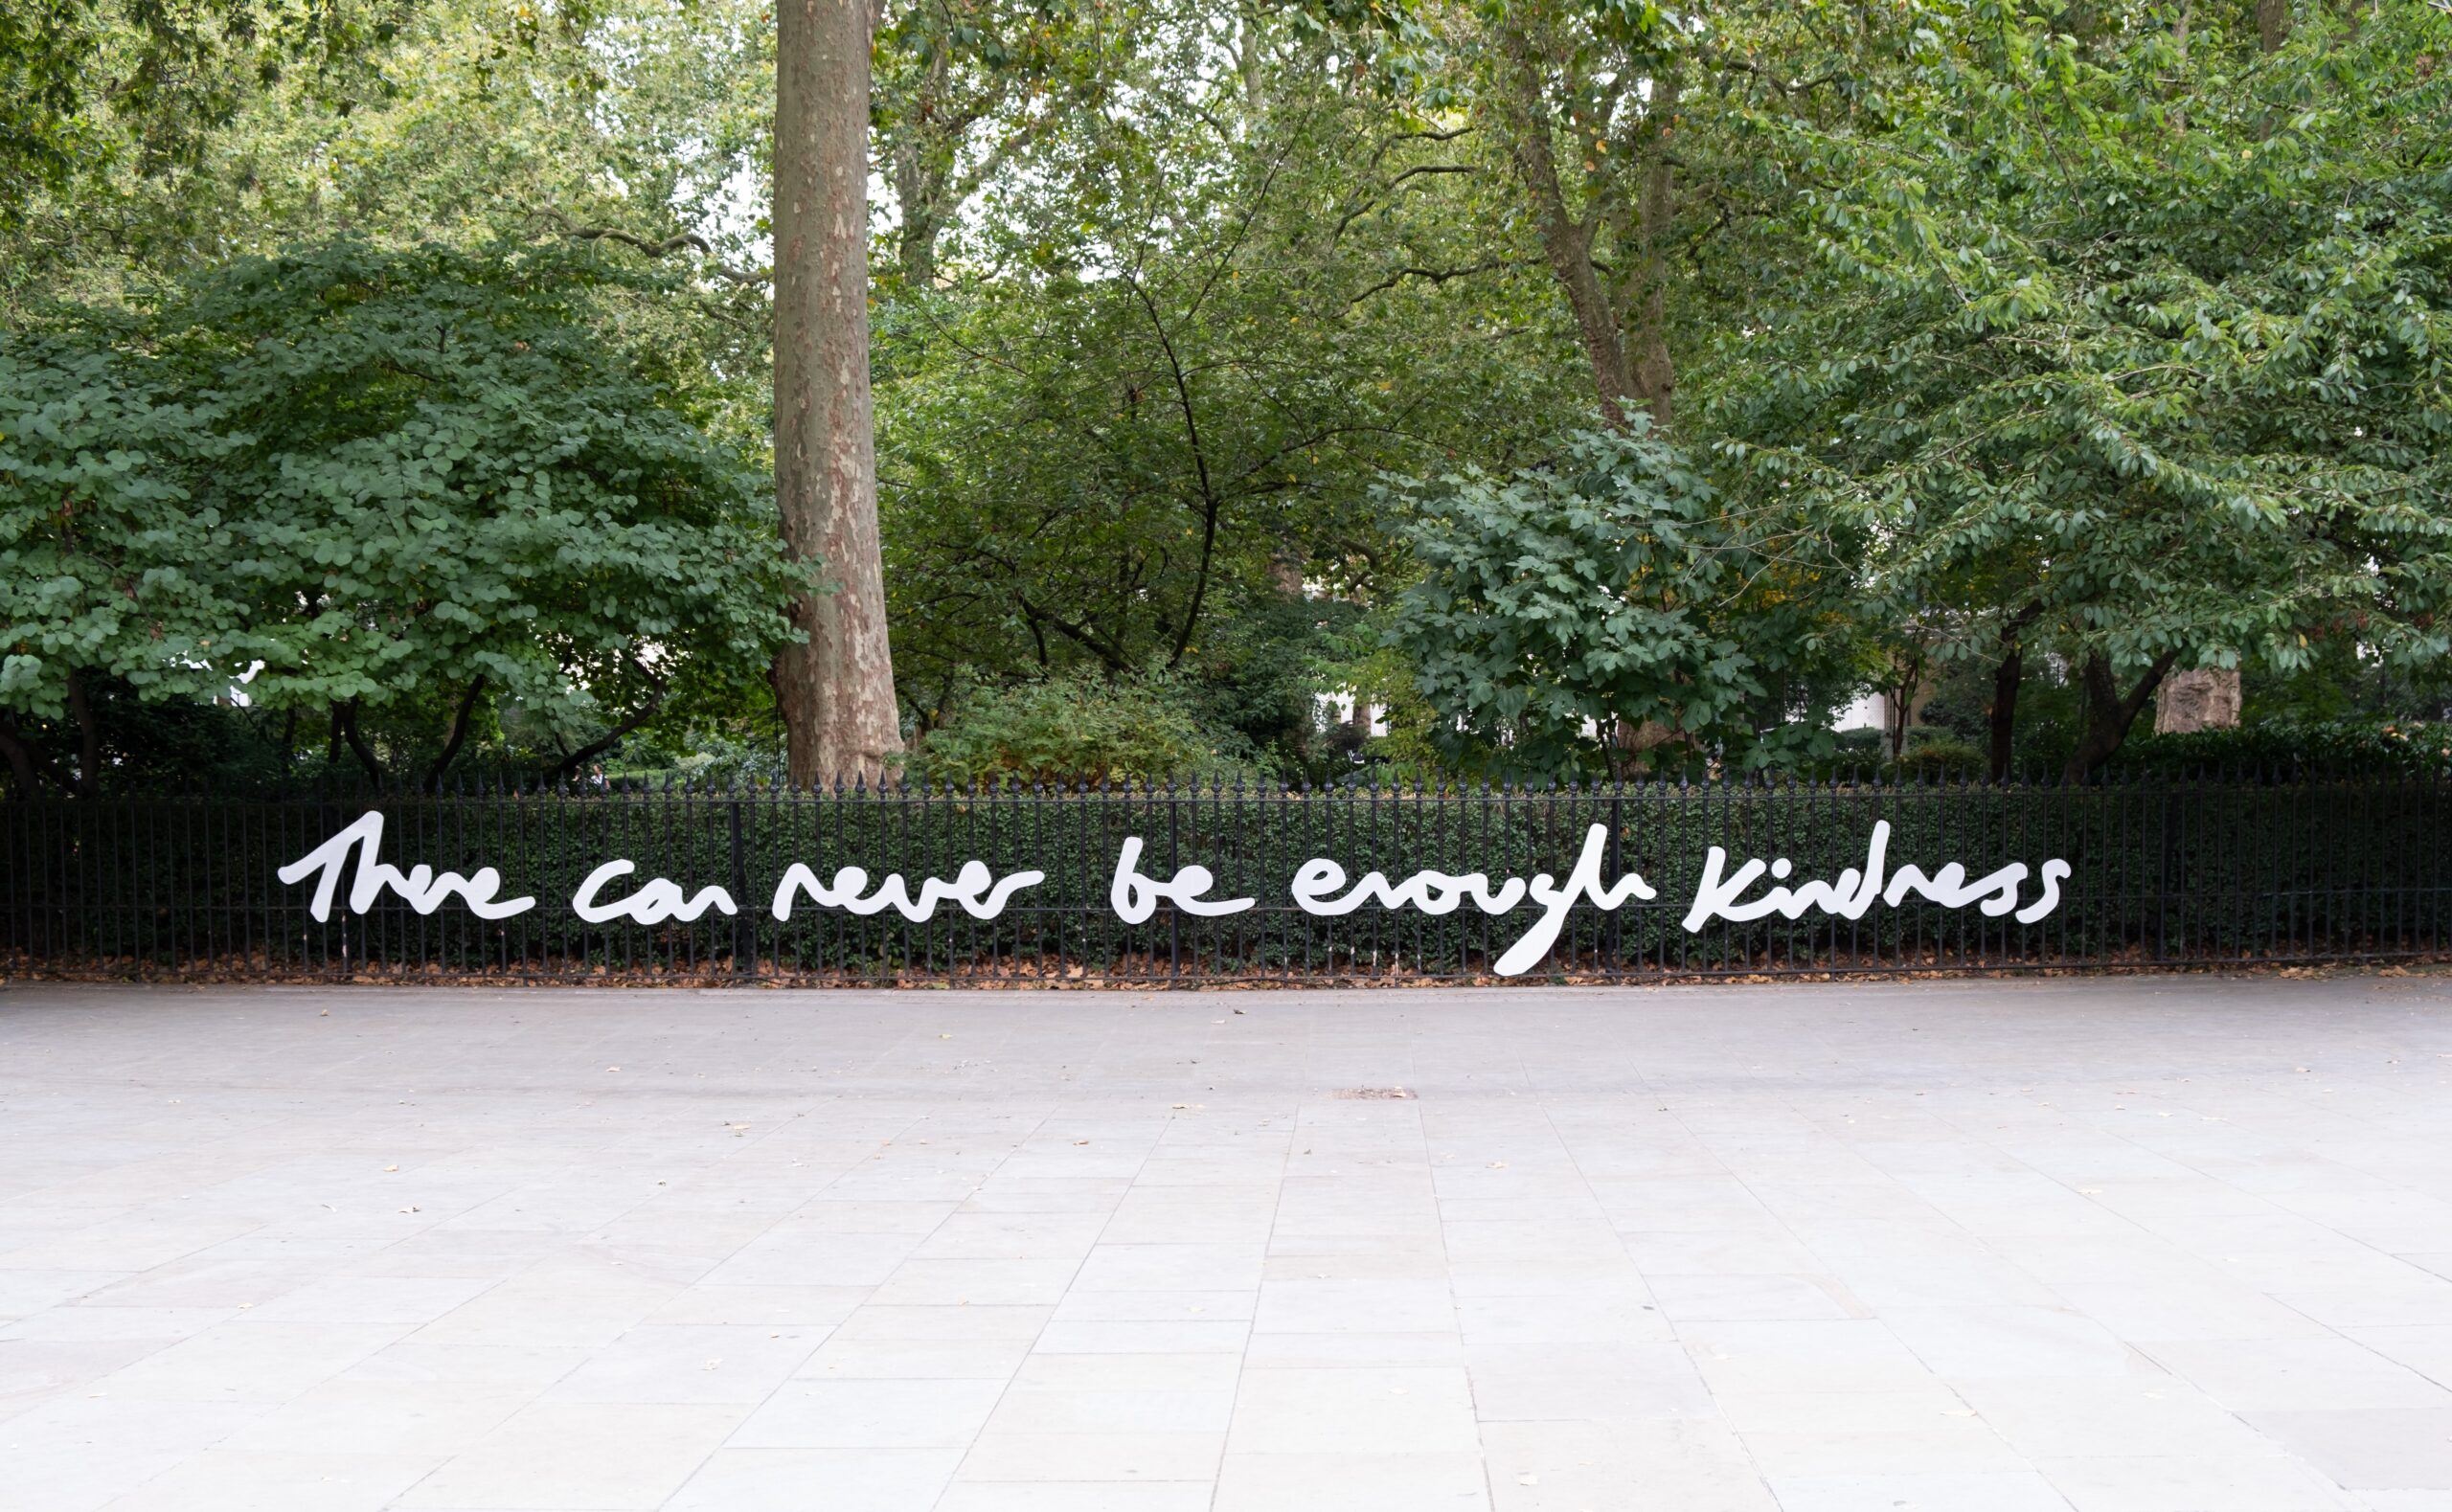 Portman Marylebone Partners with Artist Andy Leek Encouraging Visitors to the Area to ‘Find the Words’